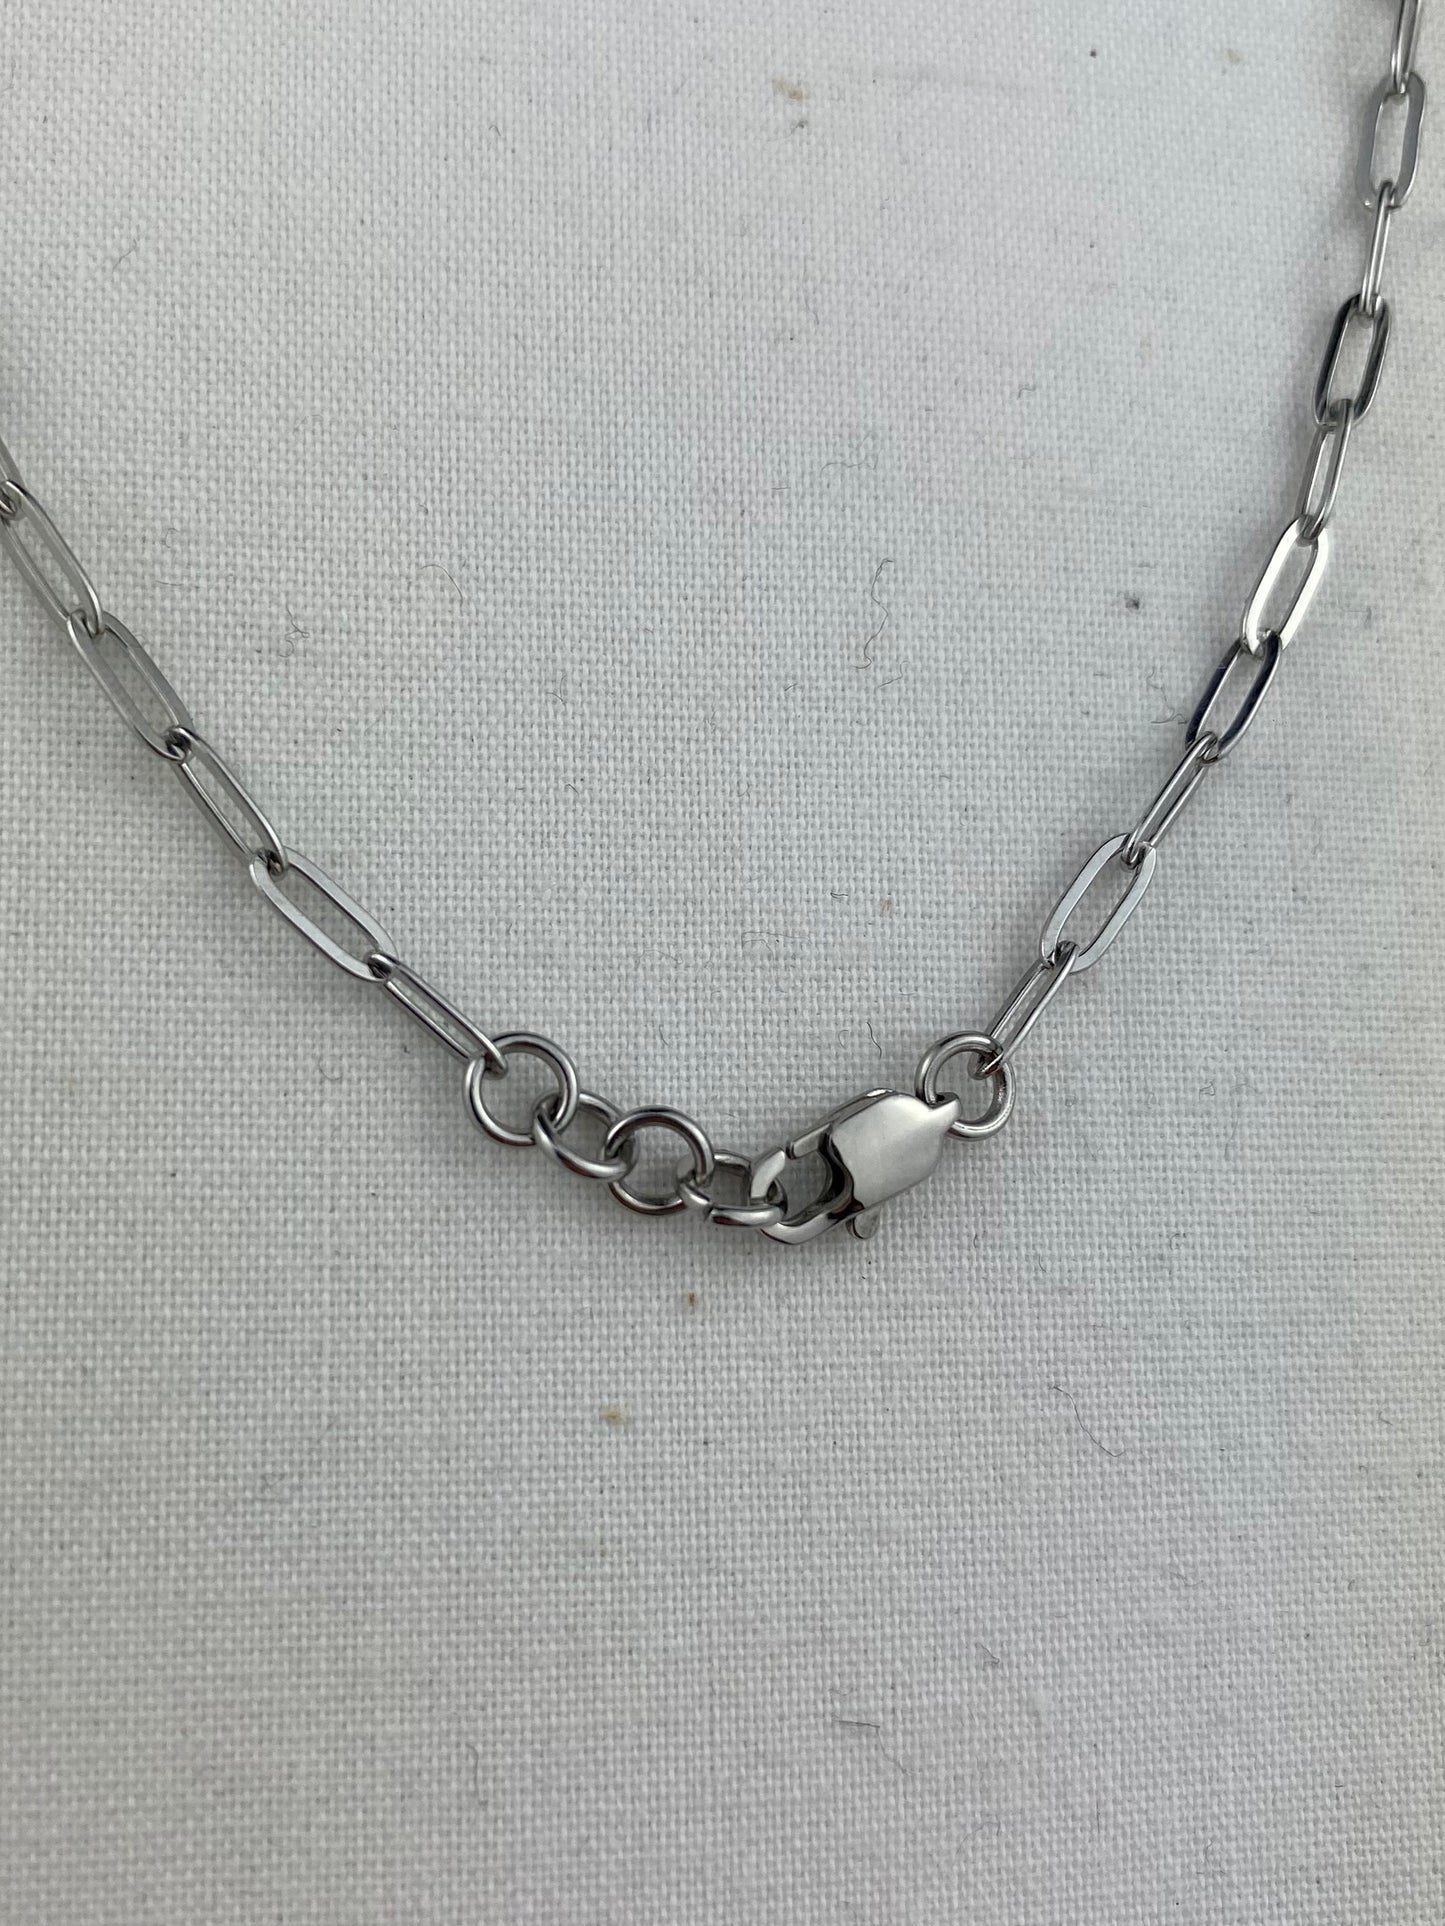 Reef Necklace - Stainless Steel